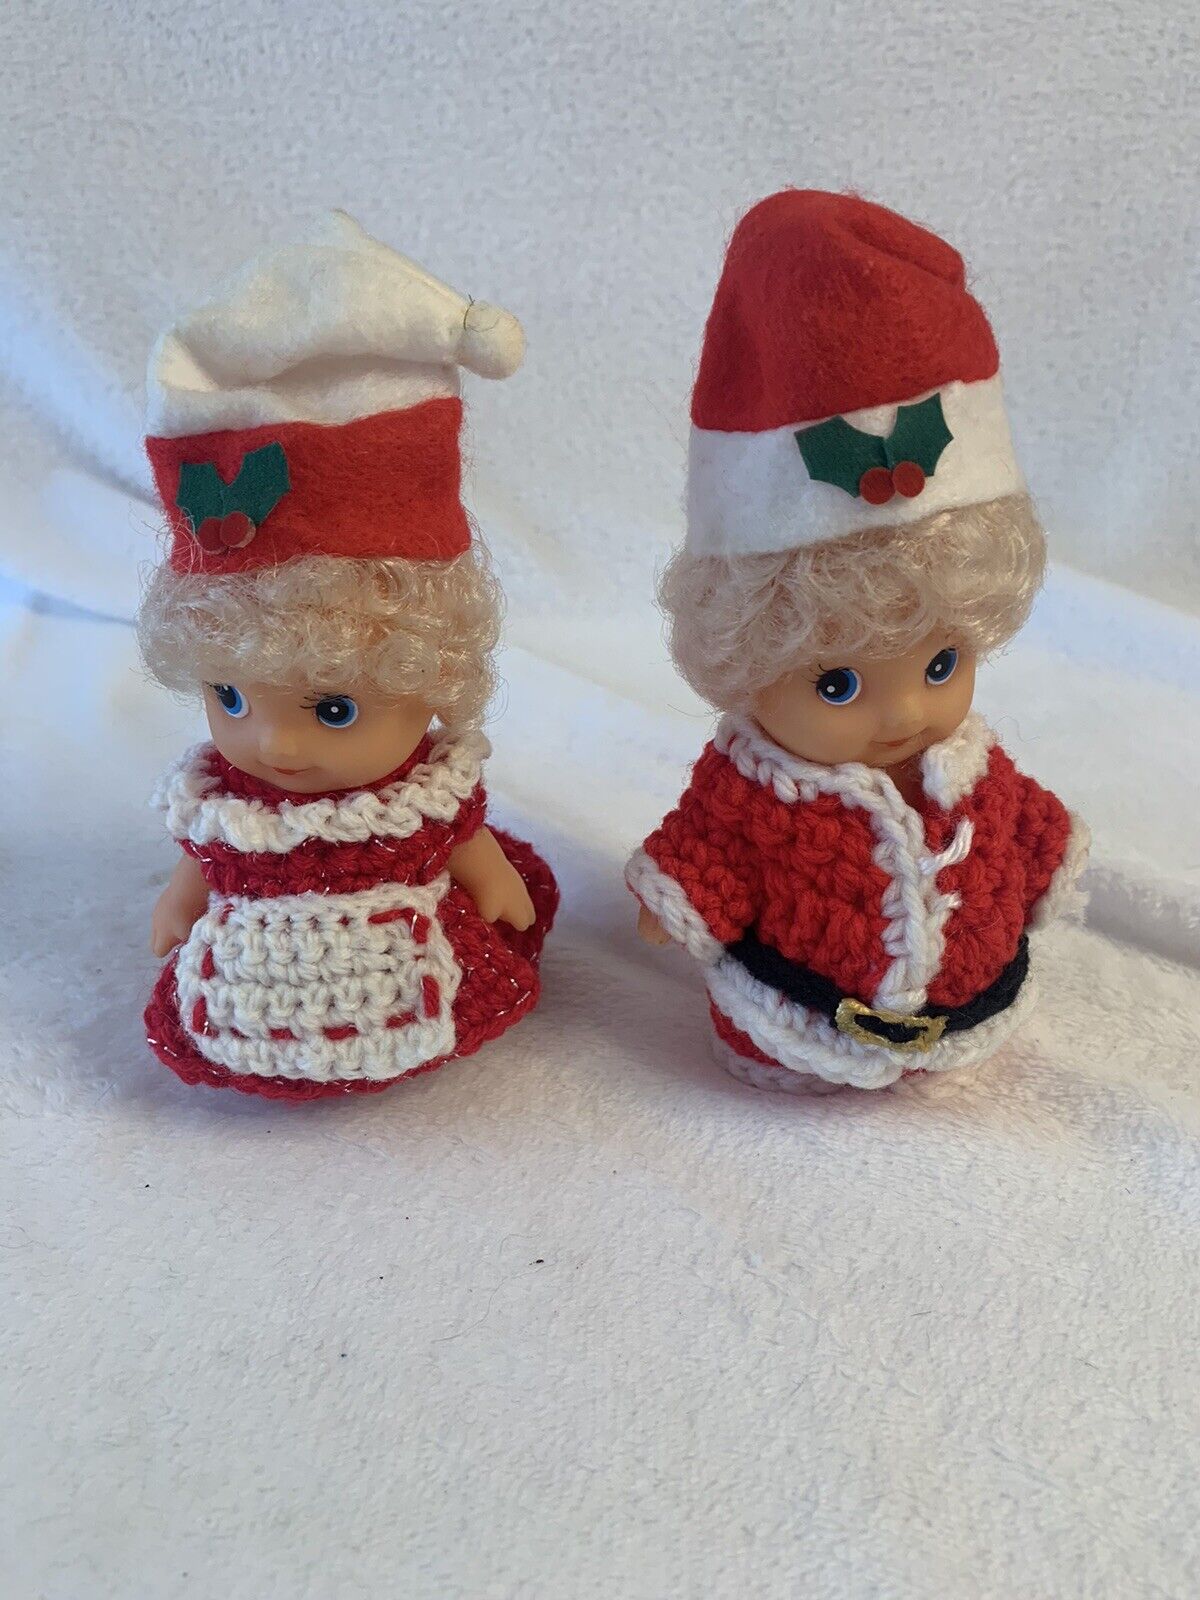 Vintage Santa And Mr Clause Crochet Cloths Kitschy Christmas Cupie Style